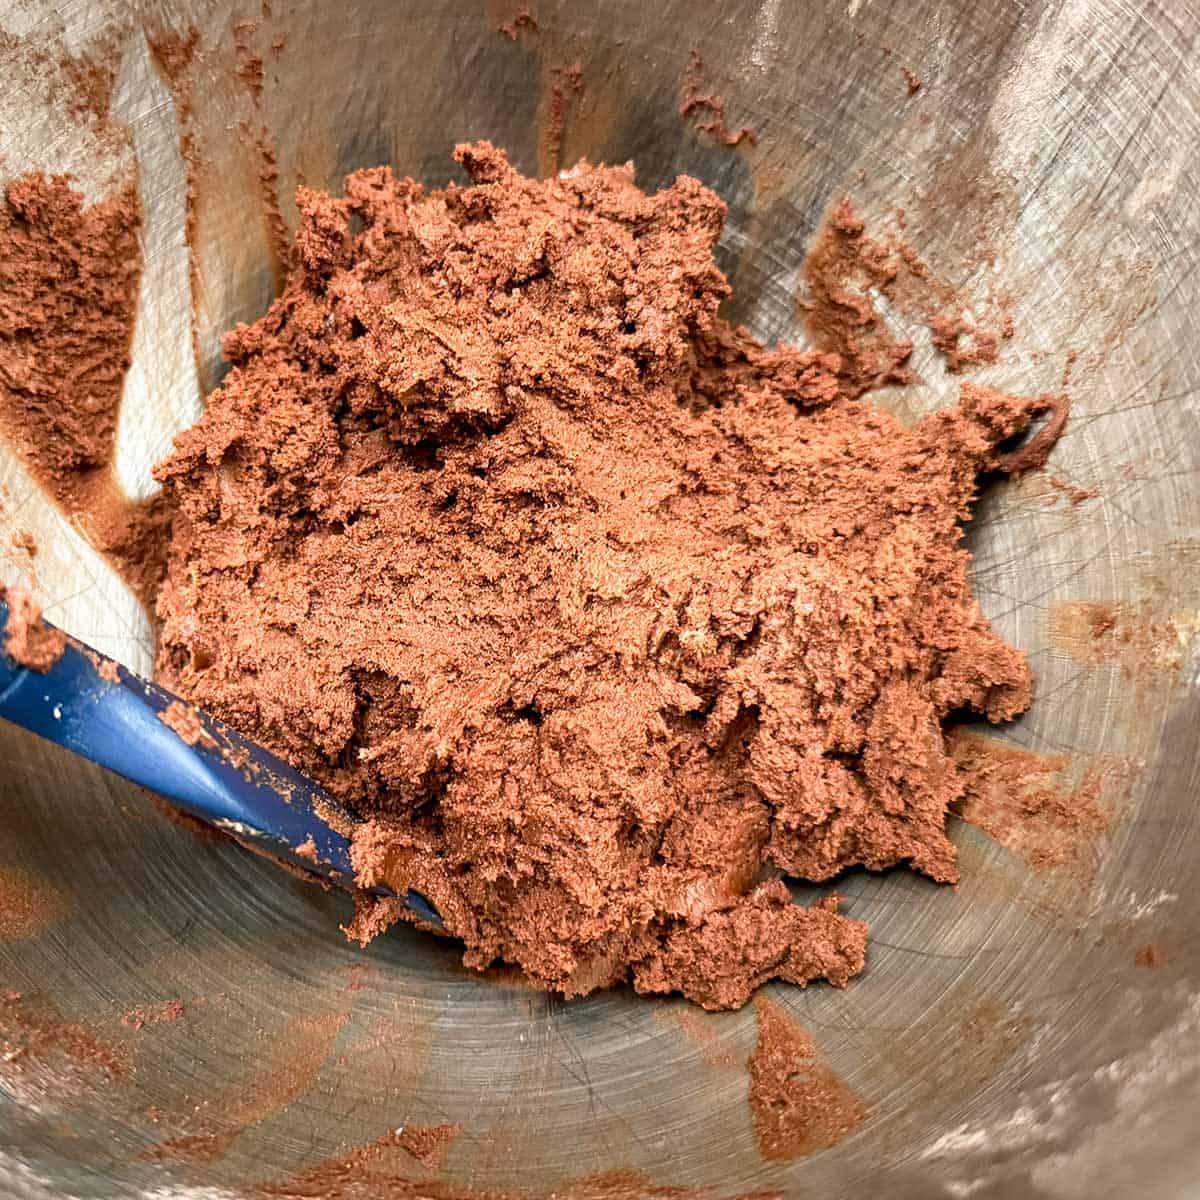 The chocolate cookie dough is mixed and in the mixer bowl.